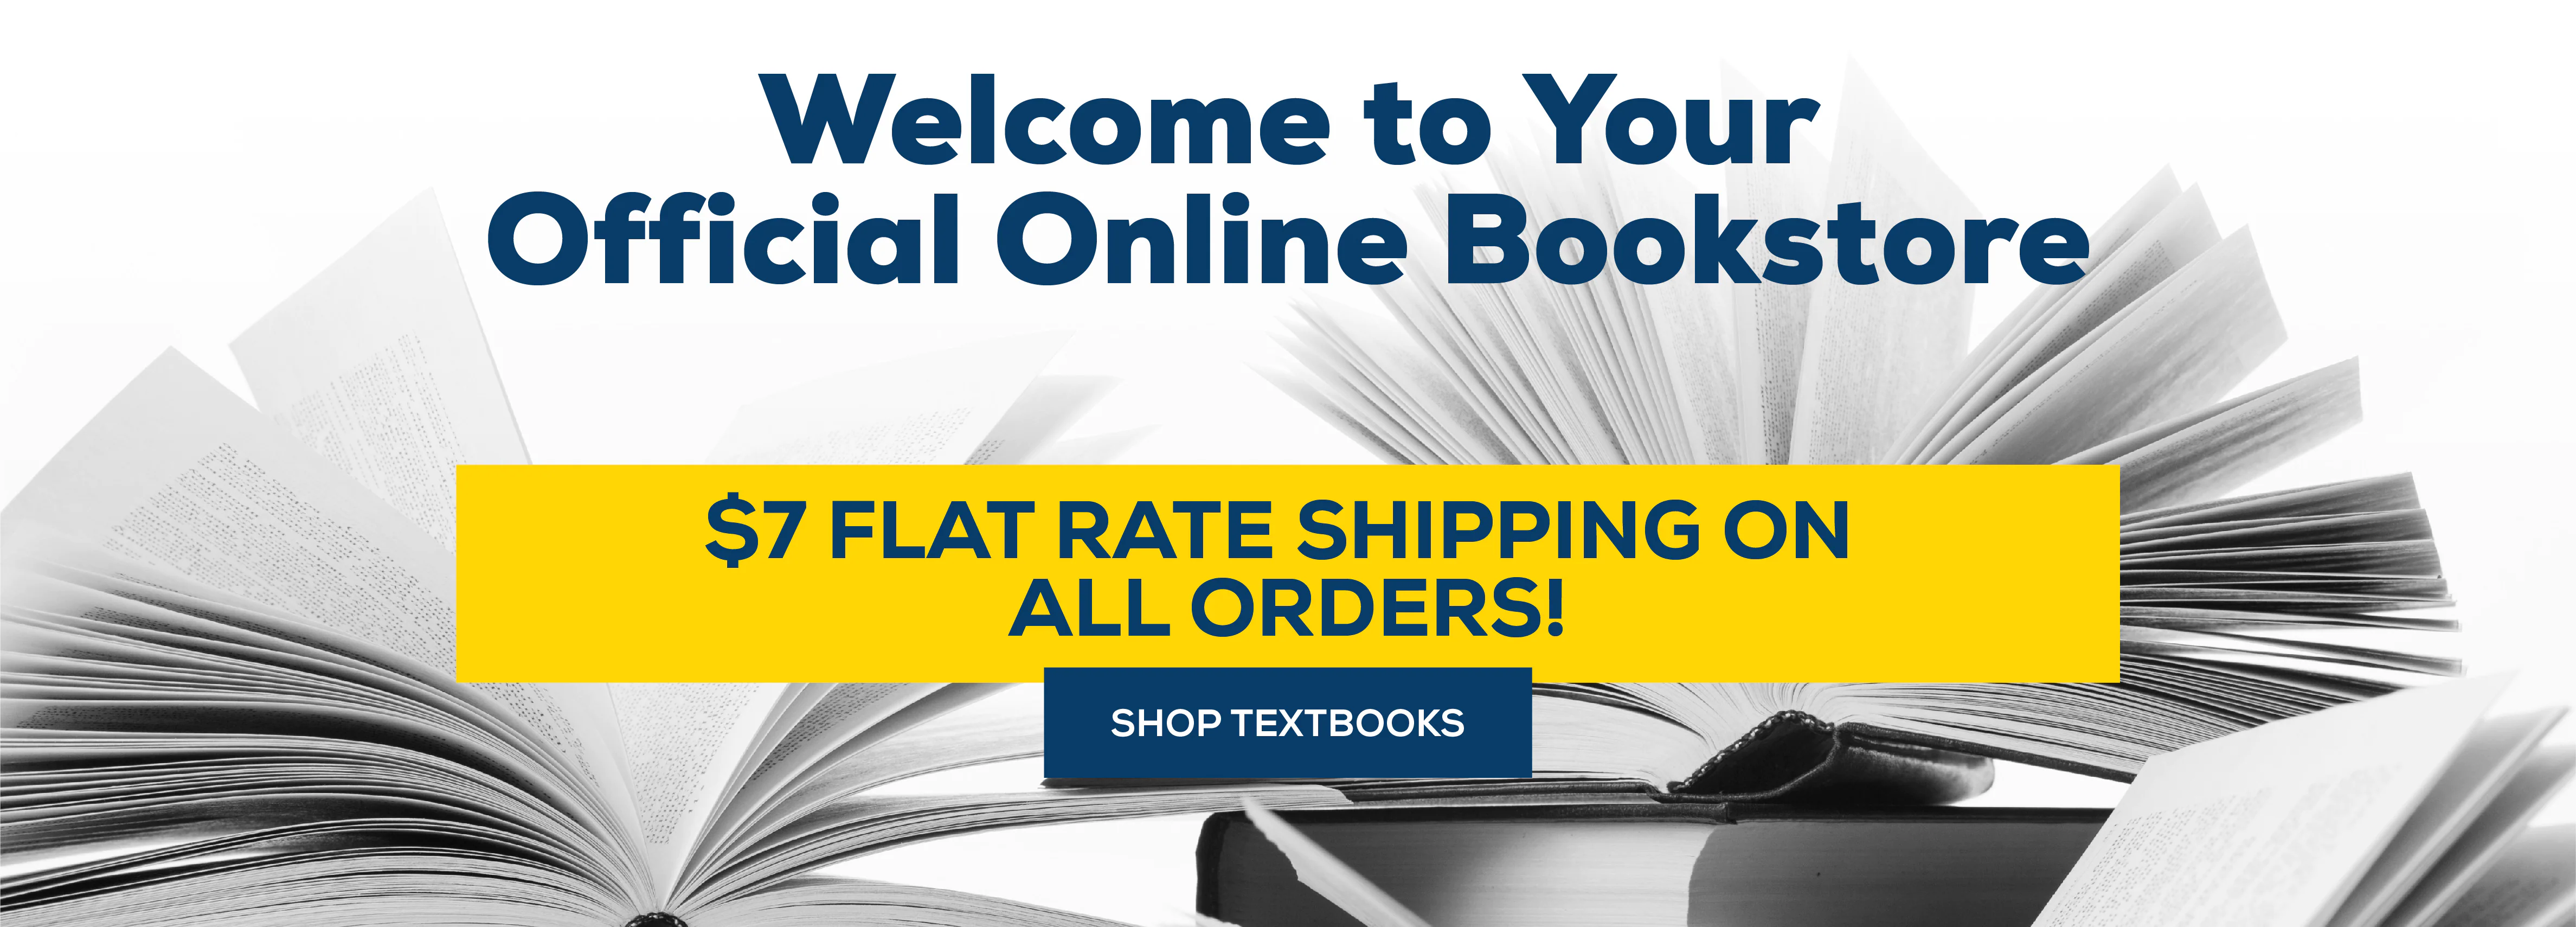 Welcome to your official online bookstore. $7 flat rate shipping on all orders! Shop Textbooks